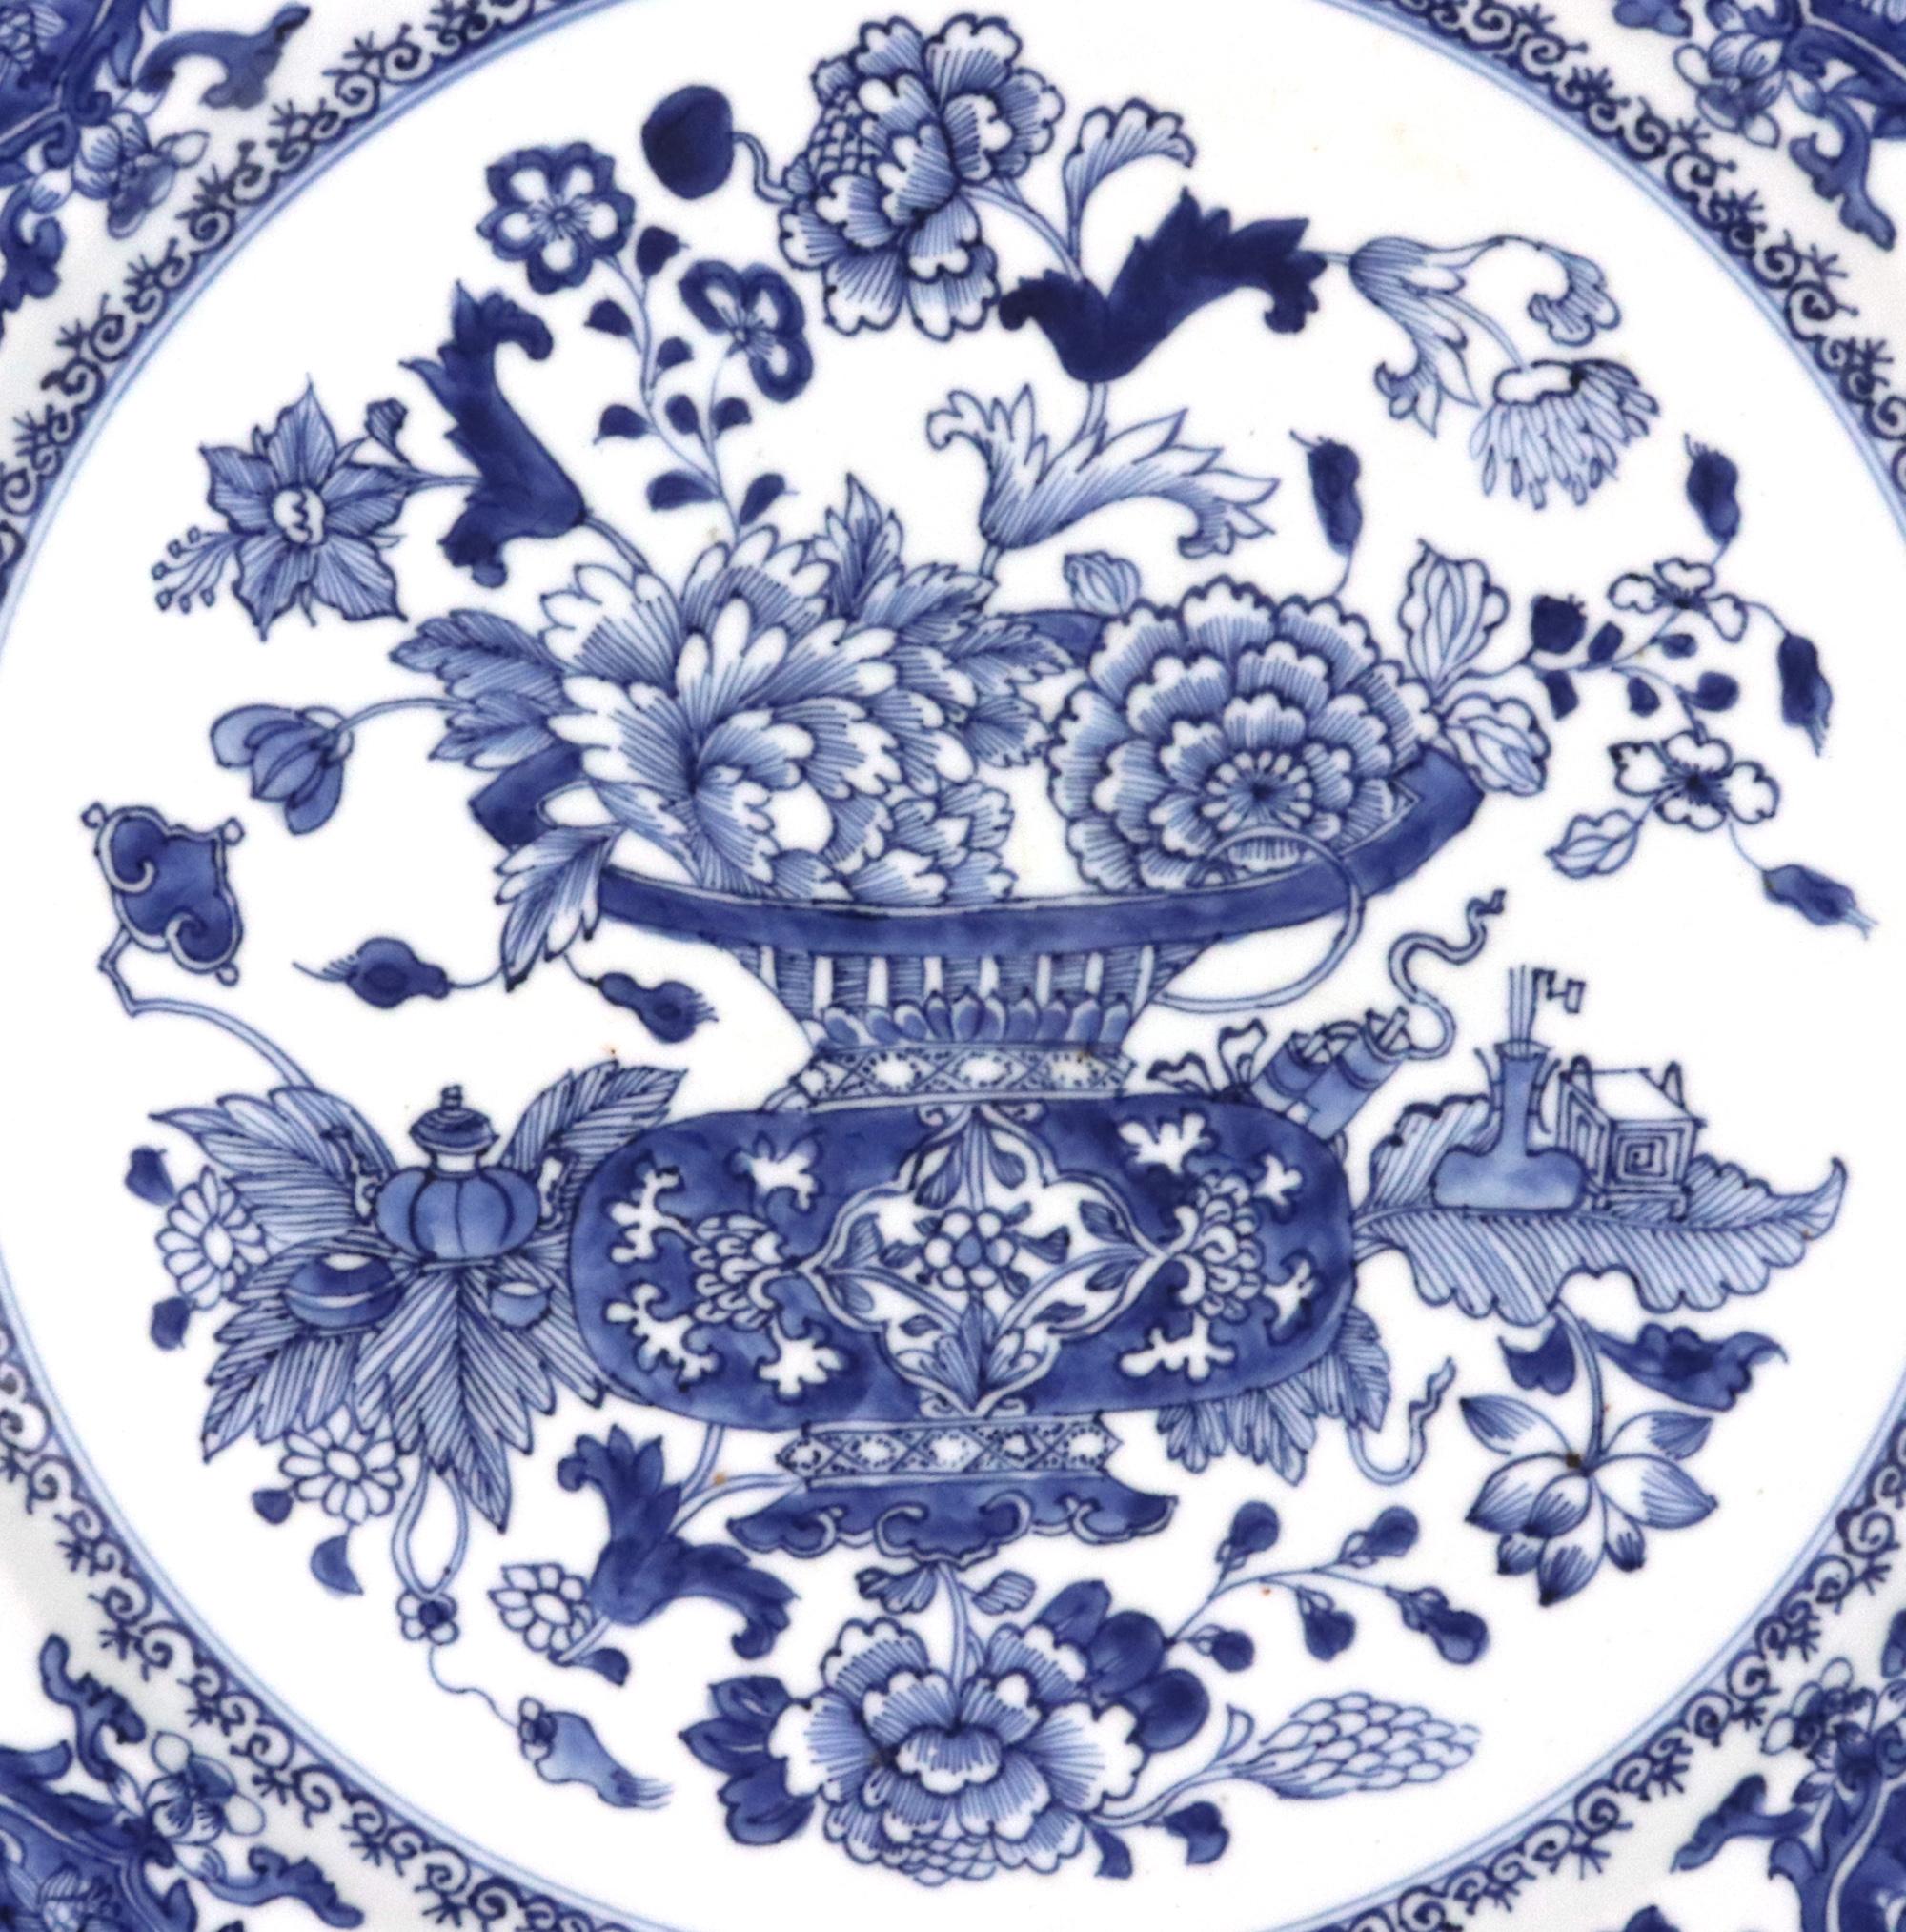 Chinese Export Porcelain Underglaze Blue Dish,
Circa 1775

The well-painted Chinese Export porcelain dish is painted in superb underglaze blue with a central large double censor, the upper openwork section filled with flowering plants and flowers. 